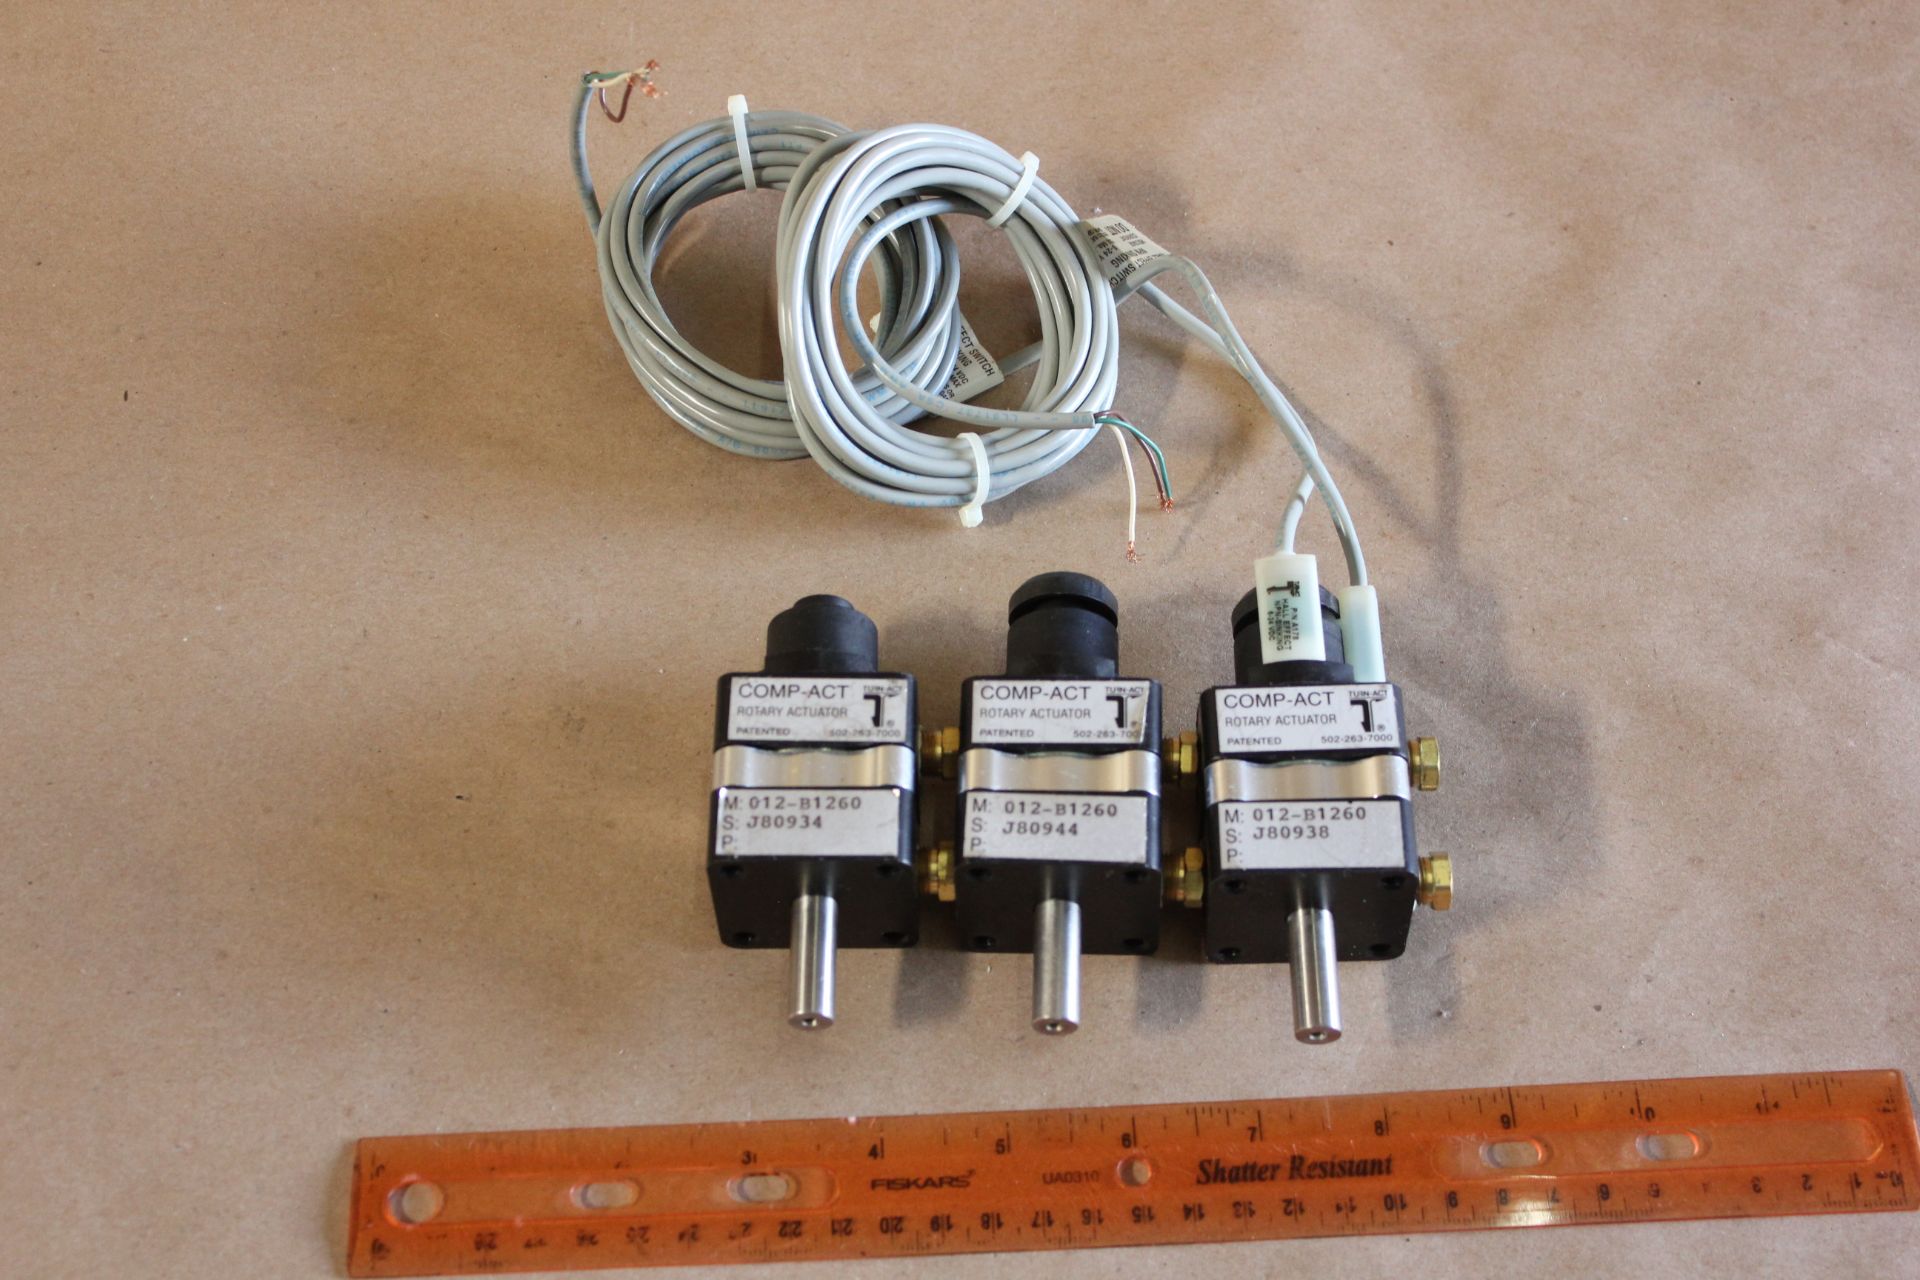 LOT OF COMP-ACT ROTARY ACTUATORS